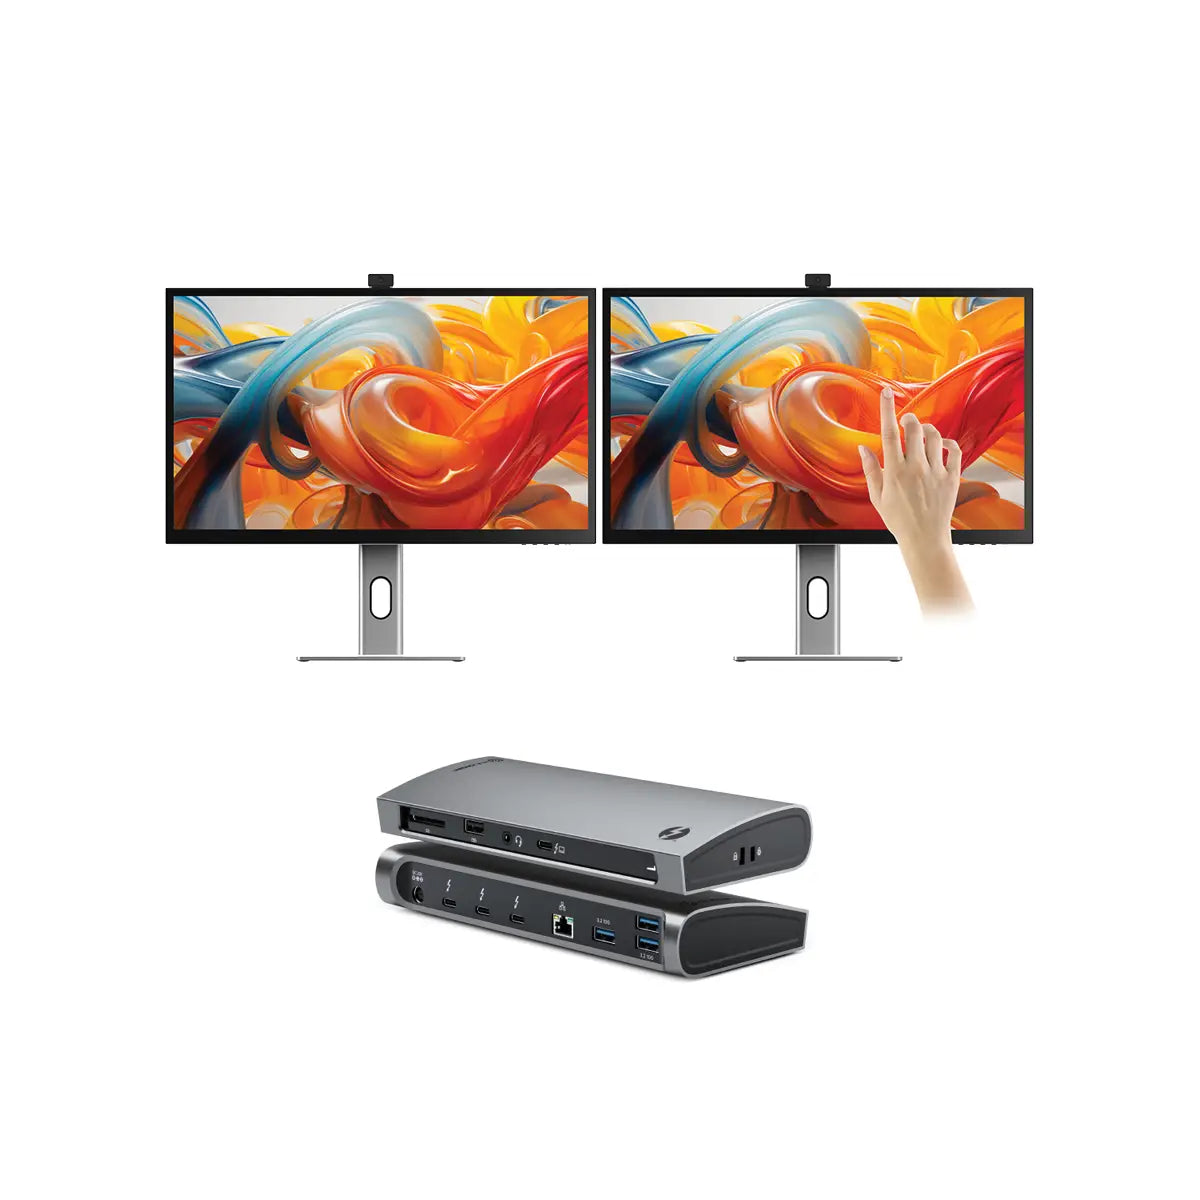 clarity-pro-touch-27-uhd-4k-monitor-with-65w-pd-webcam-and-touchscreen-pack-of-2-thunderbolt-4-blaze-docking-station_1